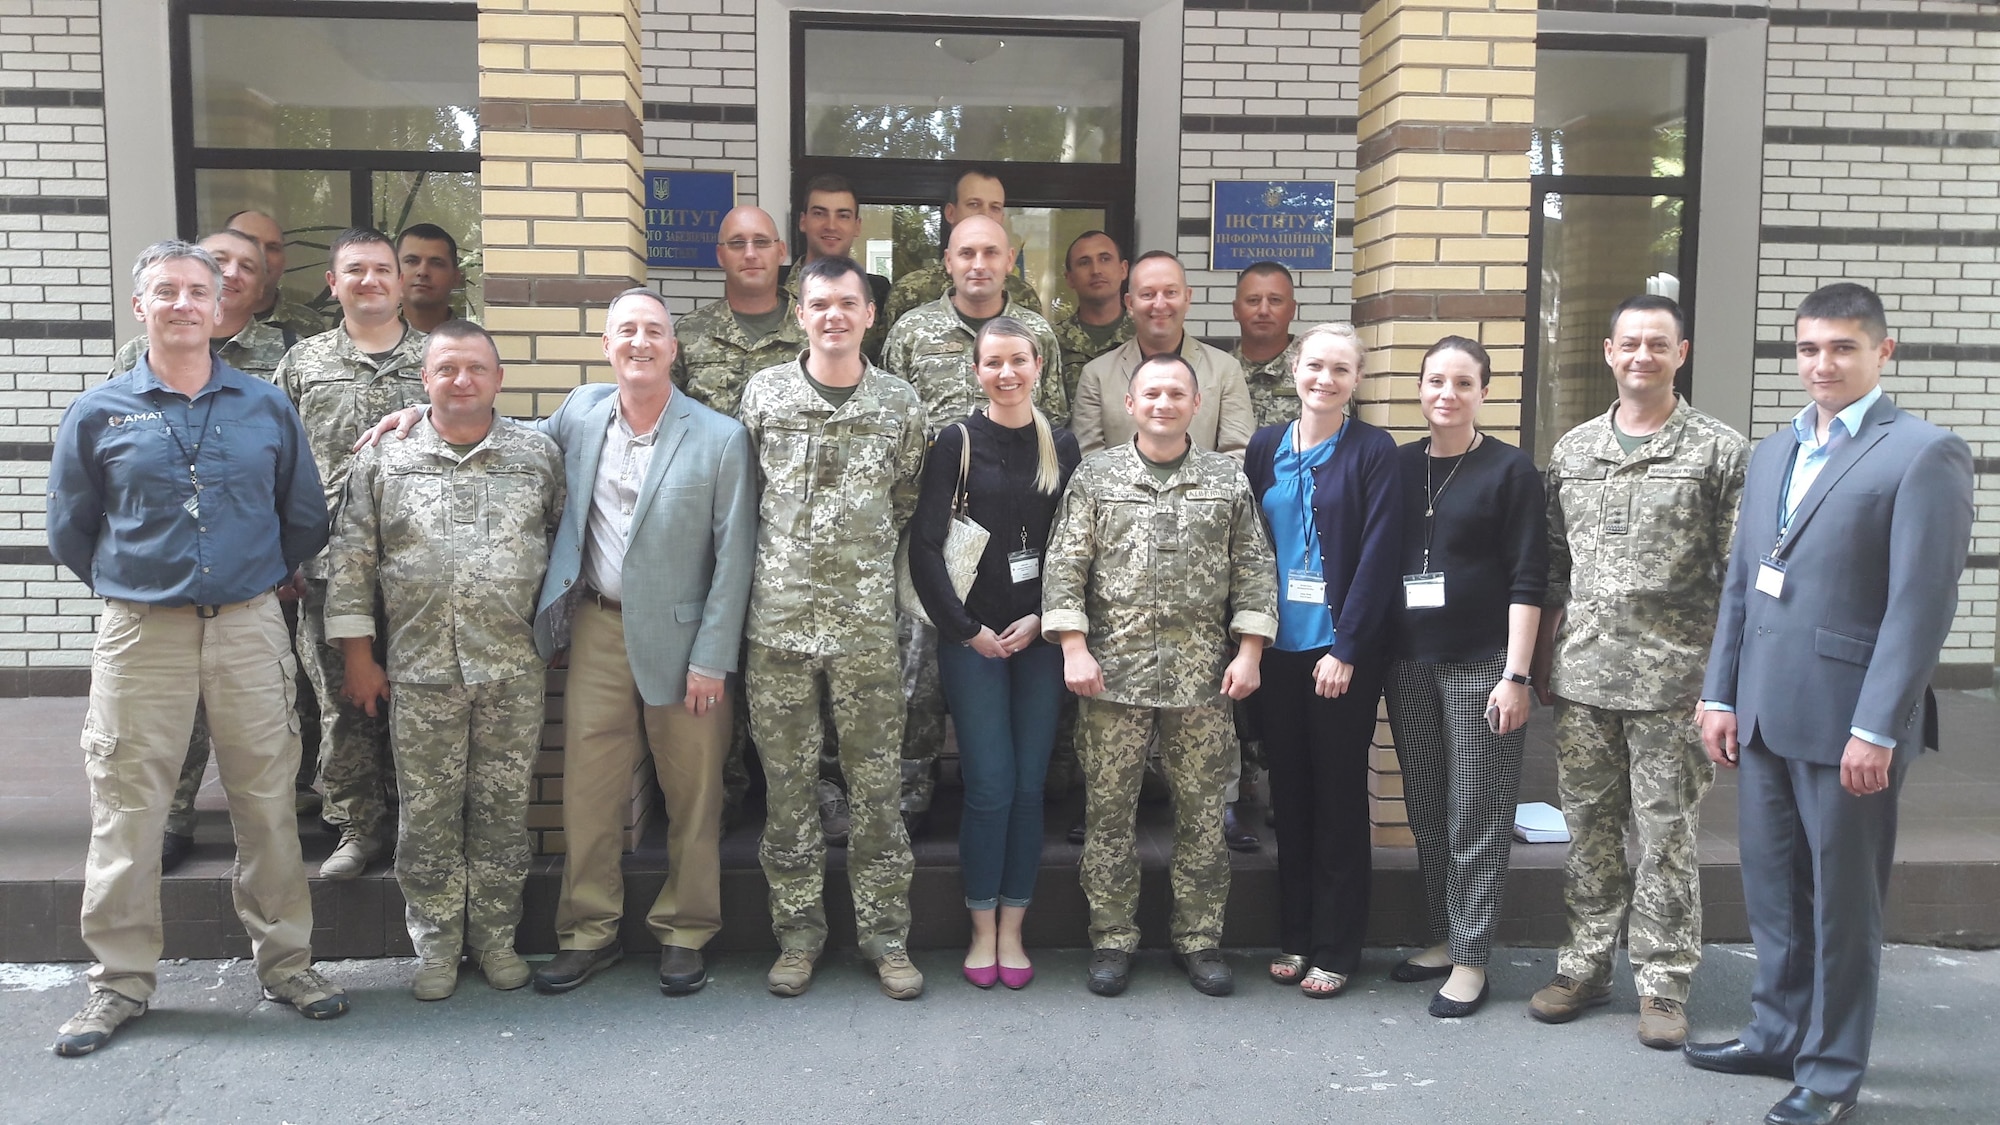 2nd Lt. Nazariy Melnychuk, 10th Missile Squadron Intercontinental Ballistic Missile combat crew member, was assigned to U.S. European Command, serving as a translator for EUCOM senior advisors in partnership with the Ukrainian military and the National Defense University of Ukraine. (Courtesy Photo)